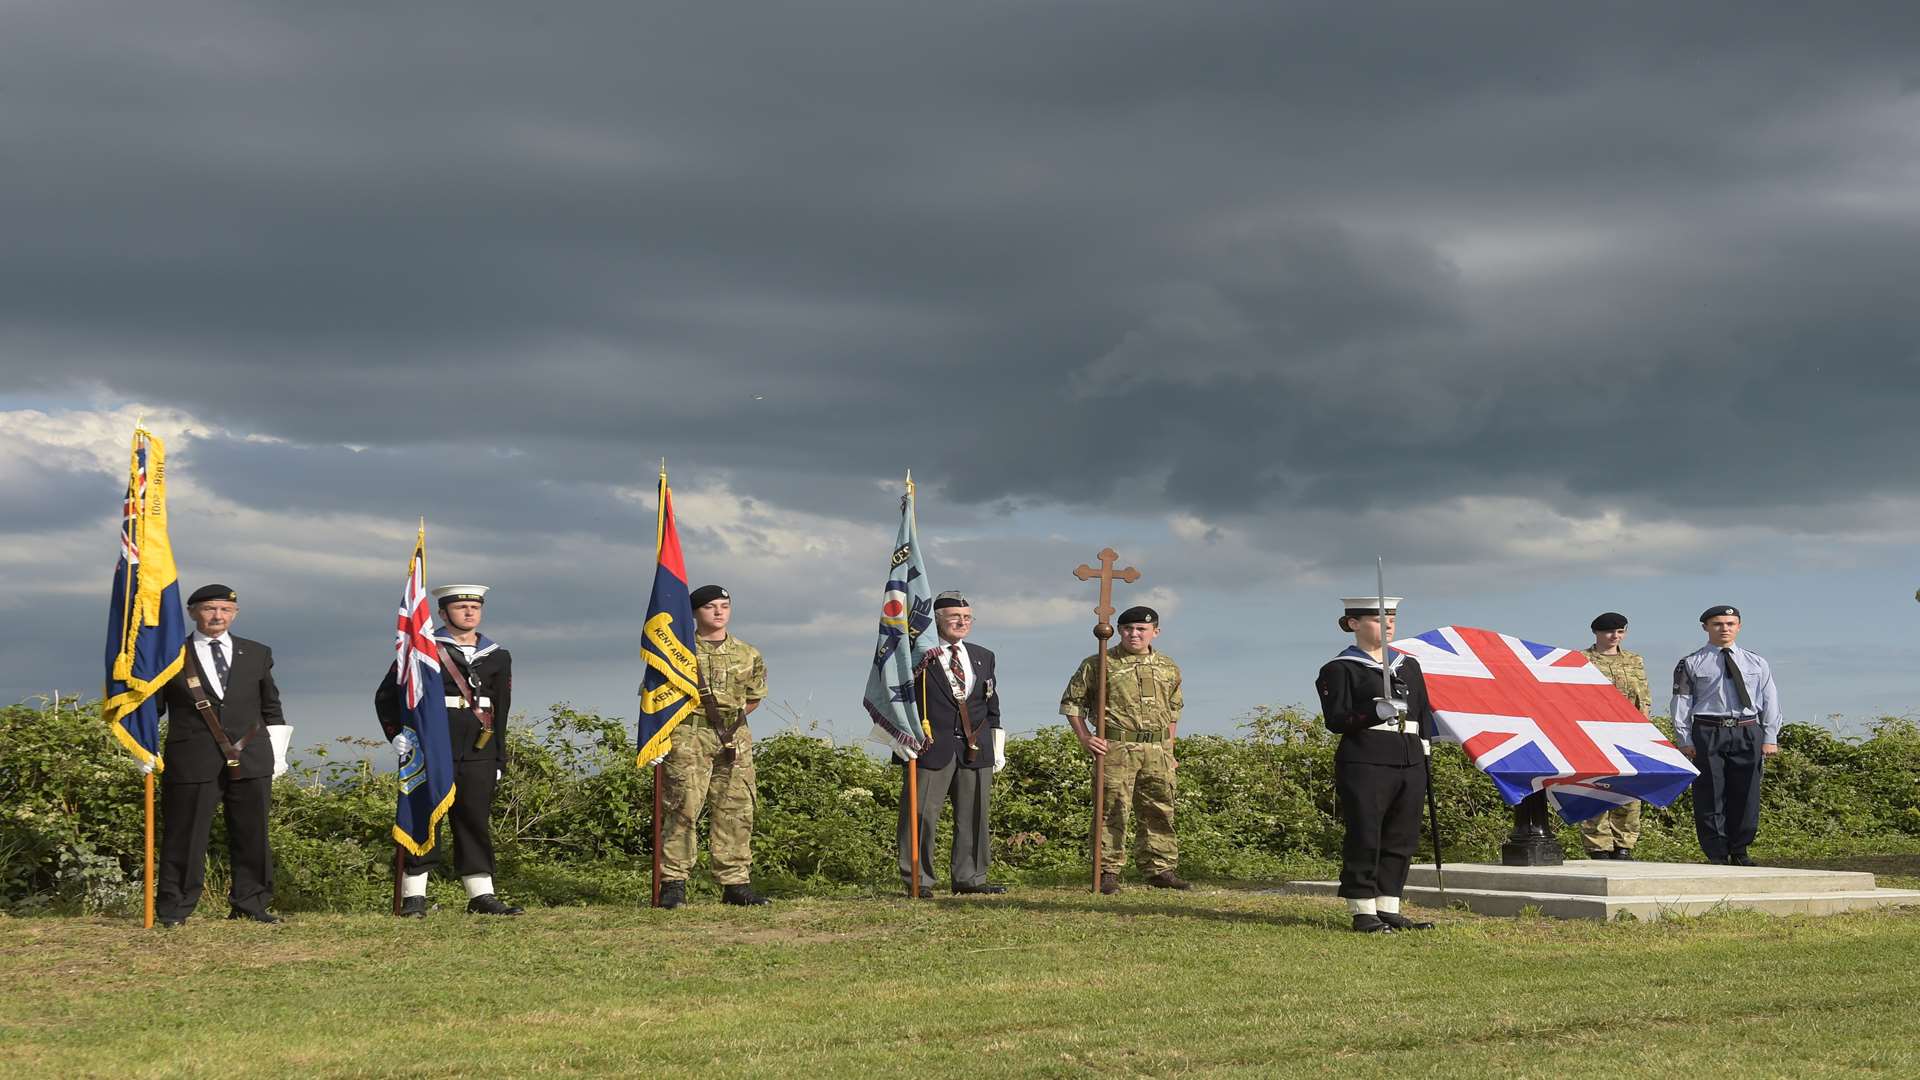 The ceremony marked the 100th anniversary of the opening of Walmer Aerodrome